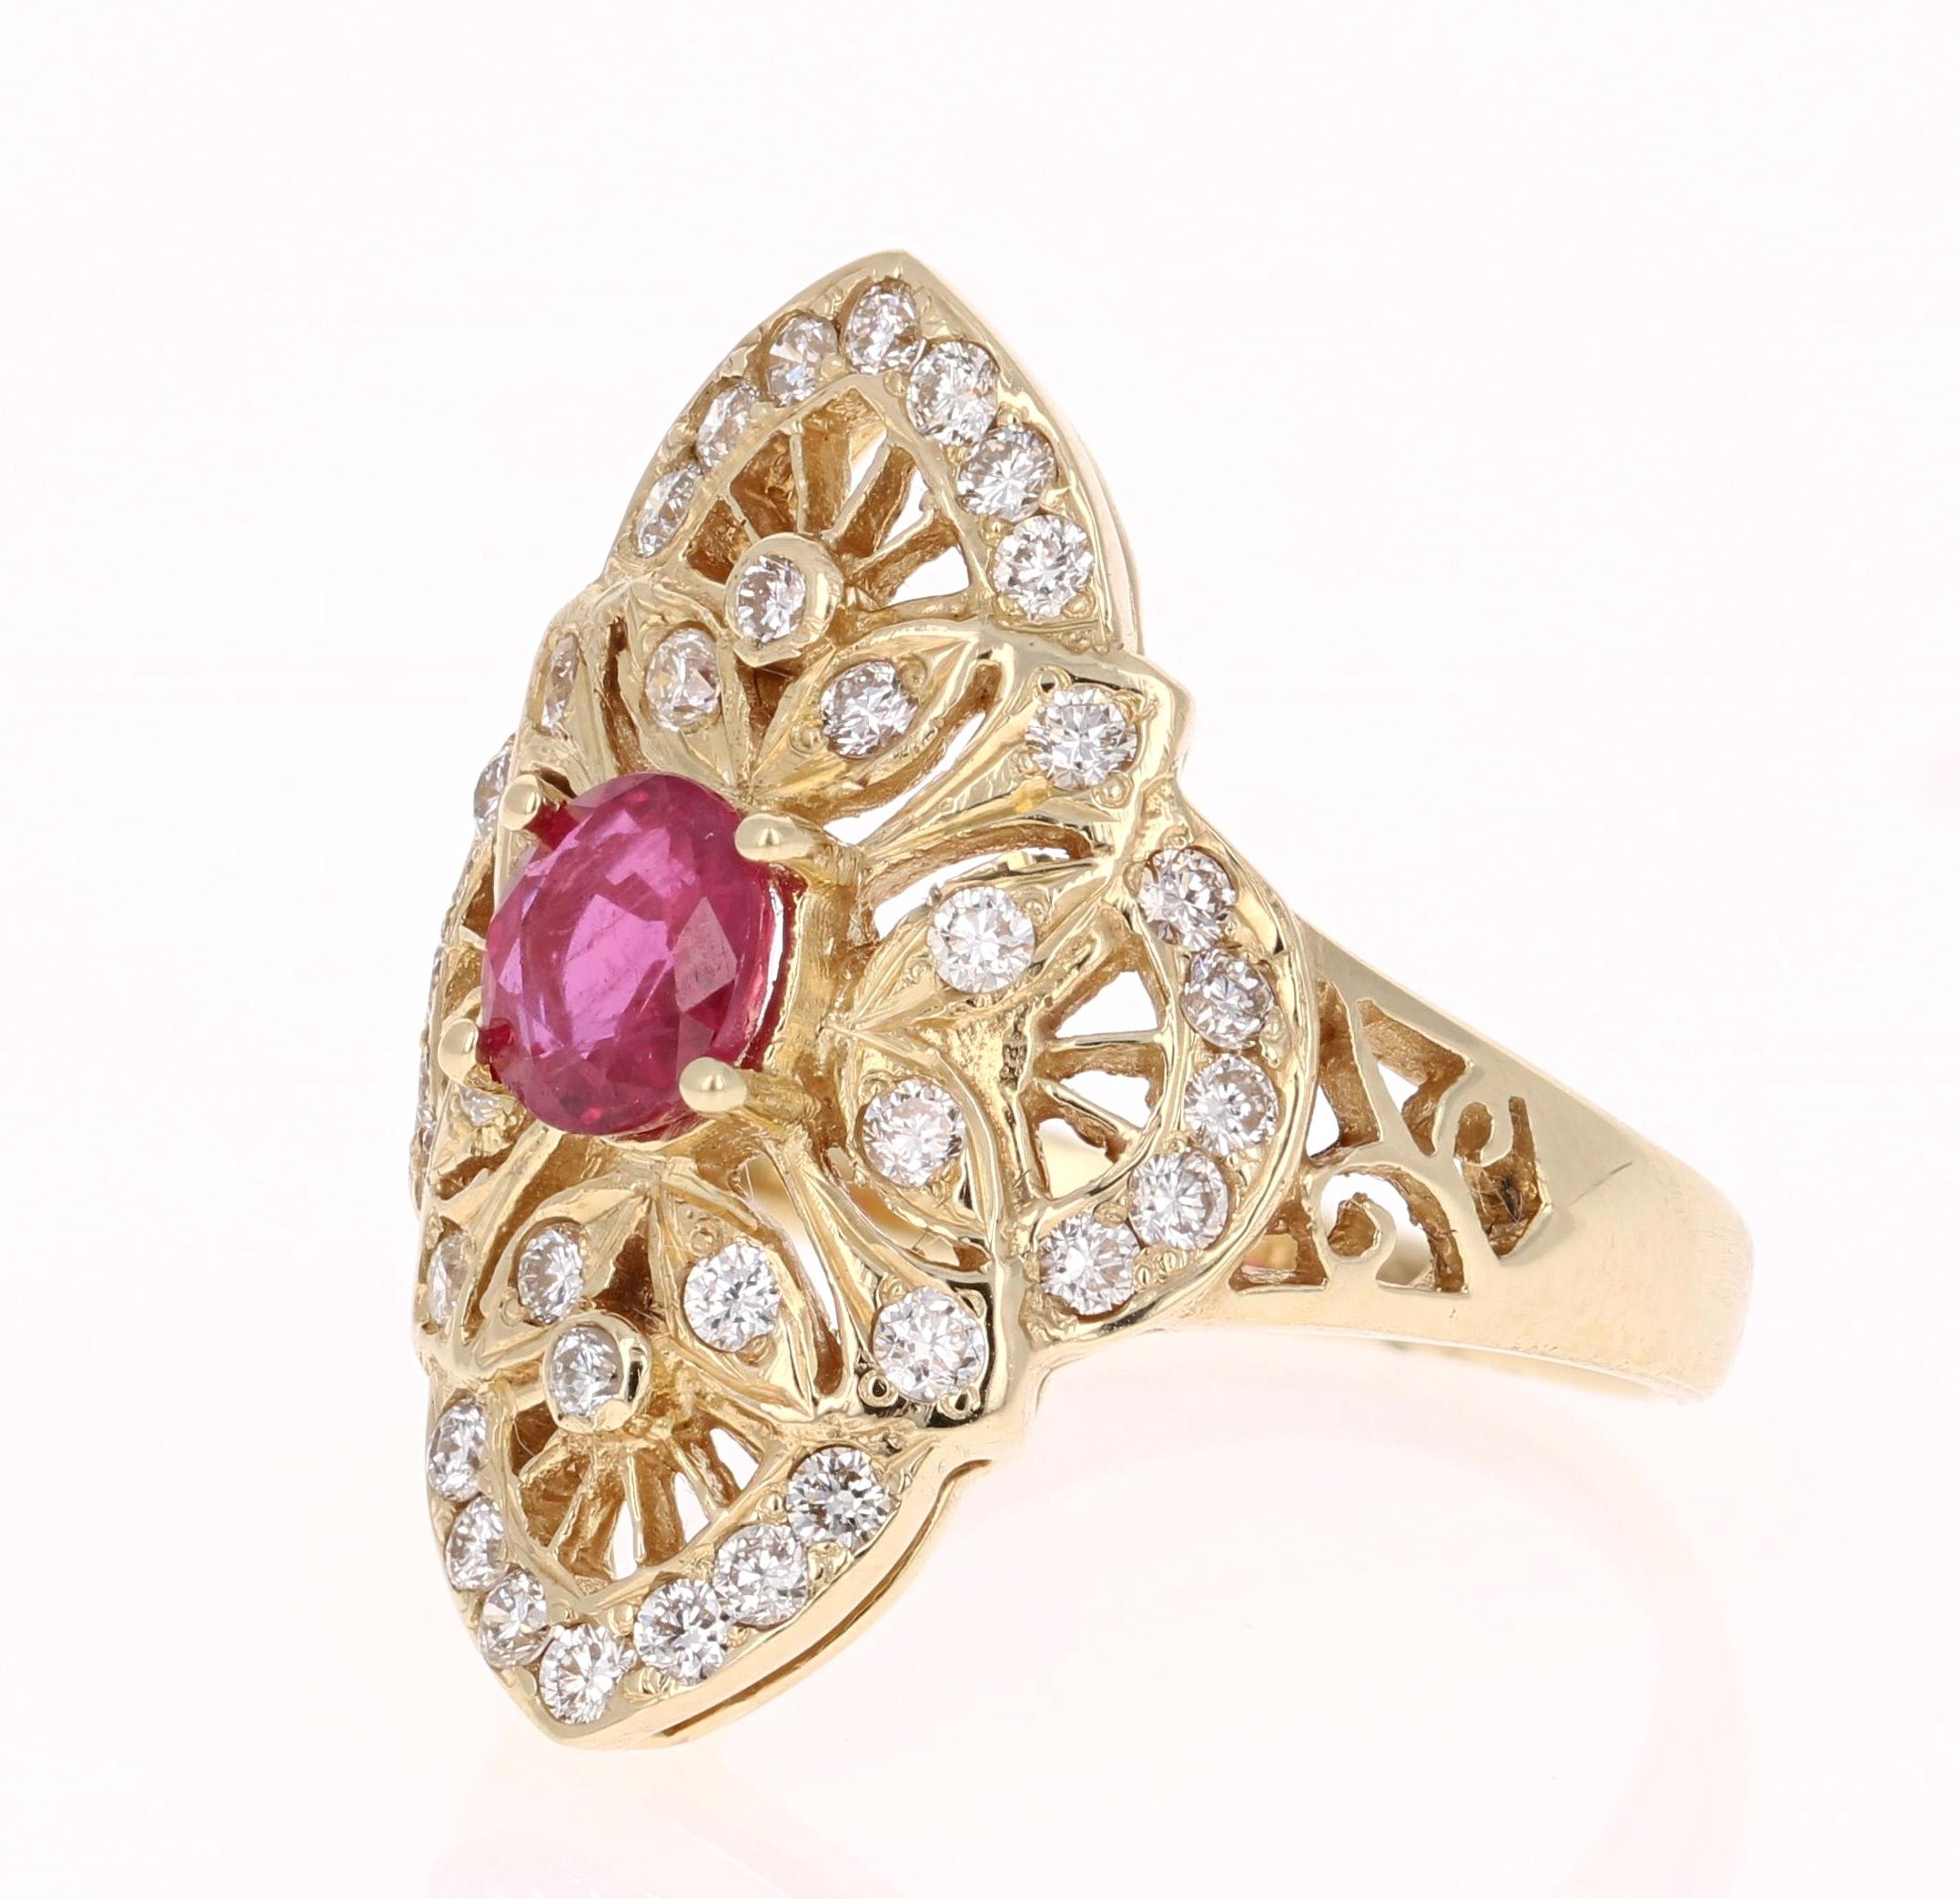 Oval Cut 1.57 Carat Ruby Diamond Art Deco Yellow Gold Cocktail Ring